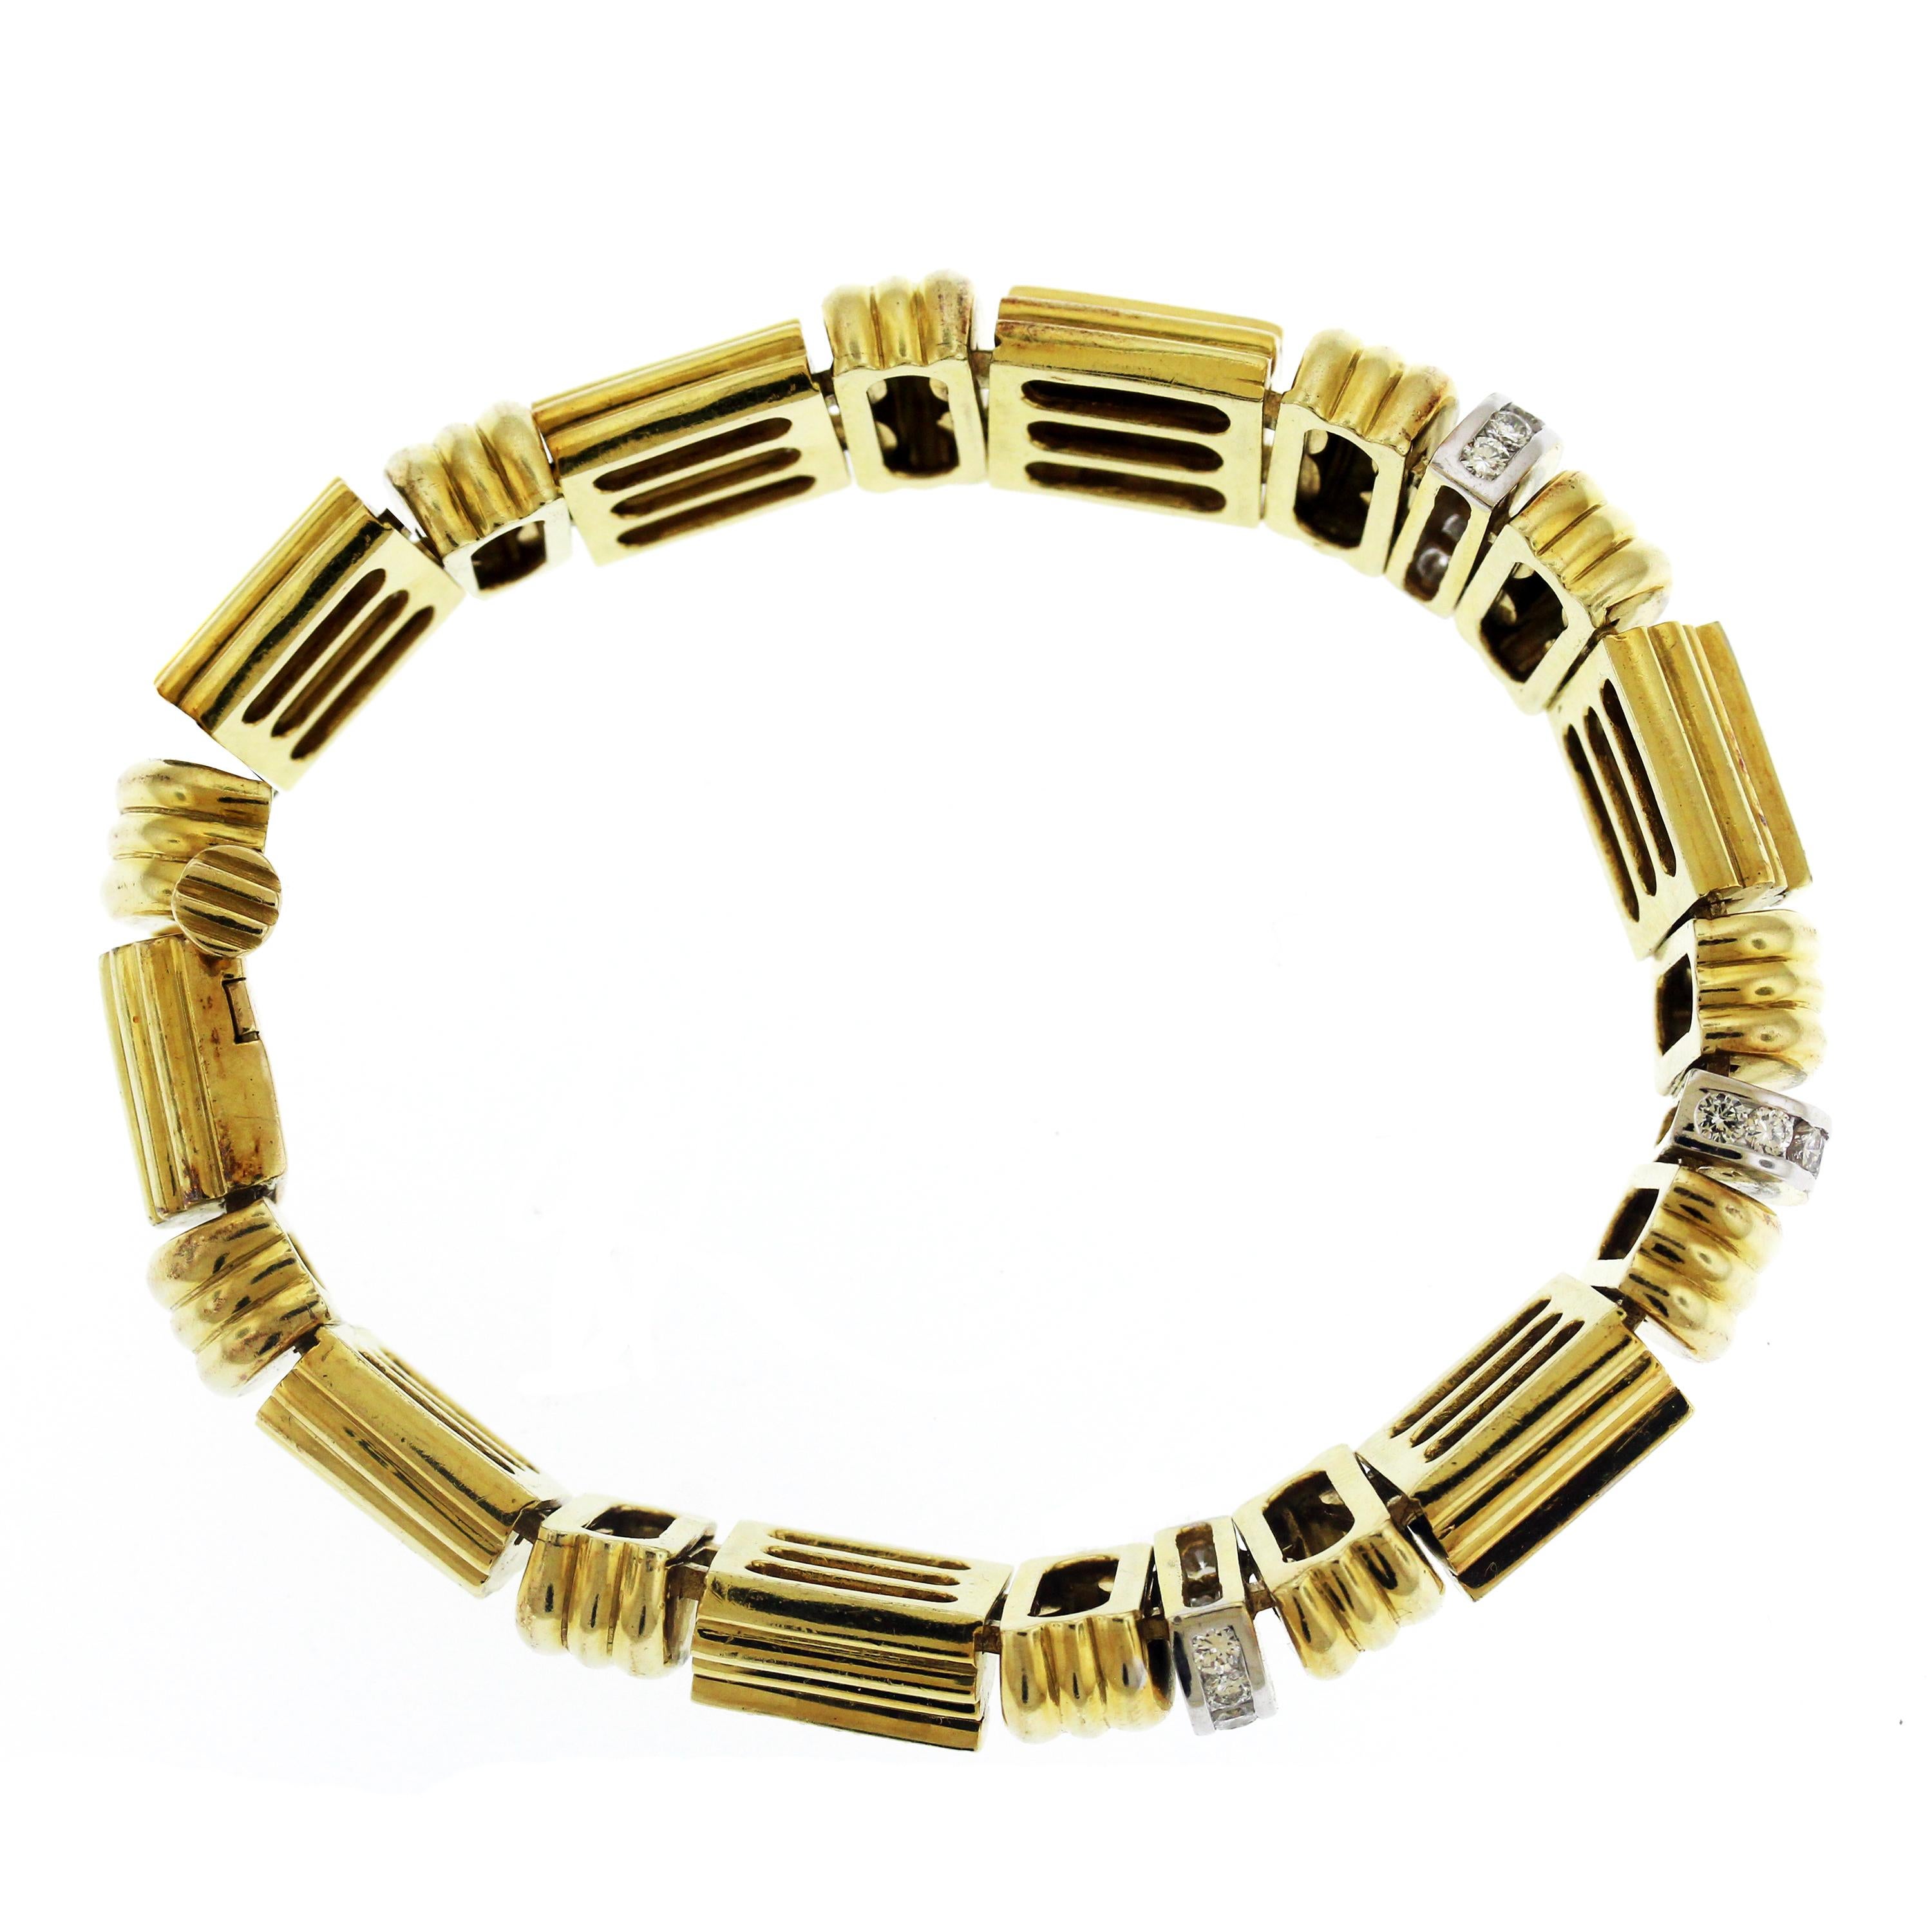 IF YOU ARE REALLY INTERESTED, CONTACT US WITH ANY REASONABLE OFFER. WE WILL TRY OUR BEST TO MAKE YOU HAPPY!

14K Yellow and White Gold and Diamond Retro Bracelet

This estate piece features 1.50 carat G color, VS clarity diamonds. (apprx.